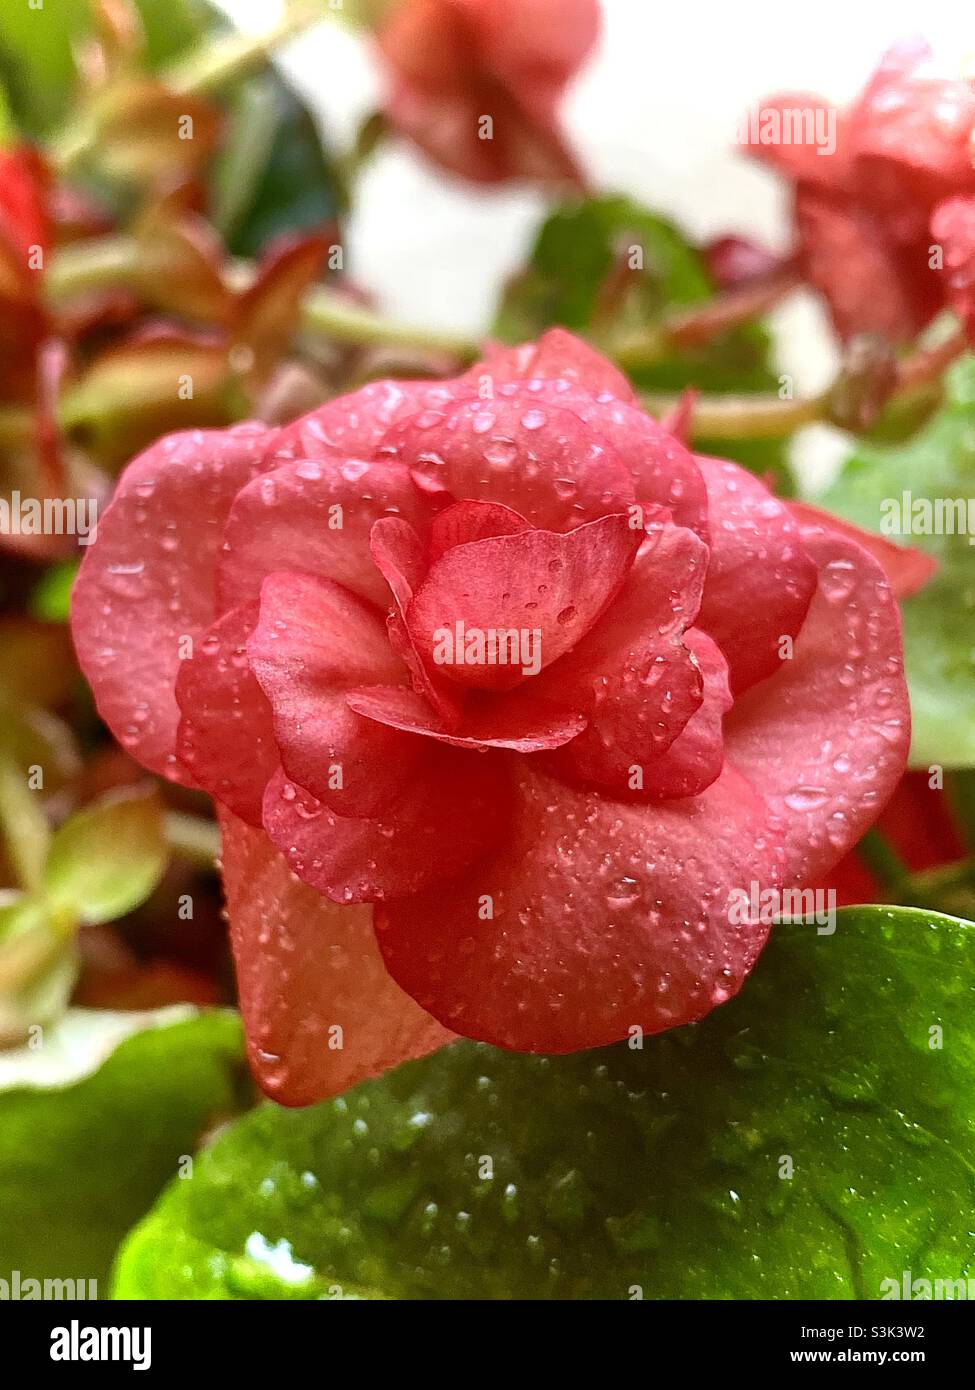 Beautiful begonia flower blossom with red petals and water drops. Stock Photo